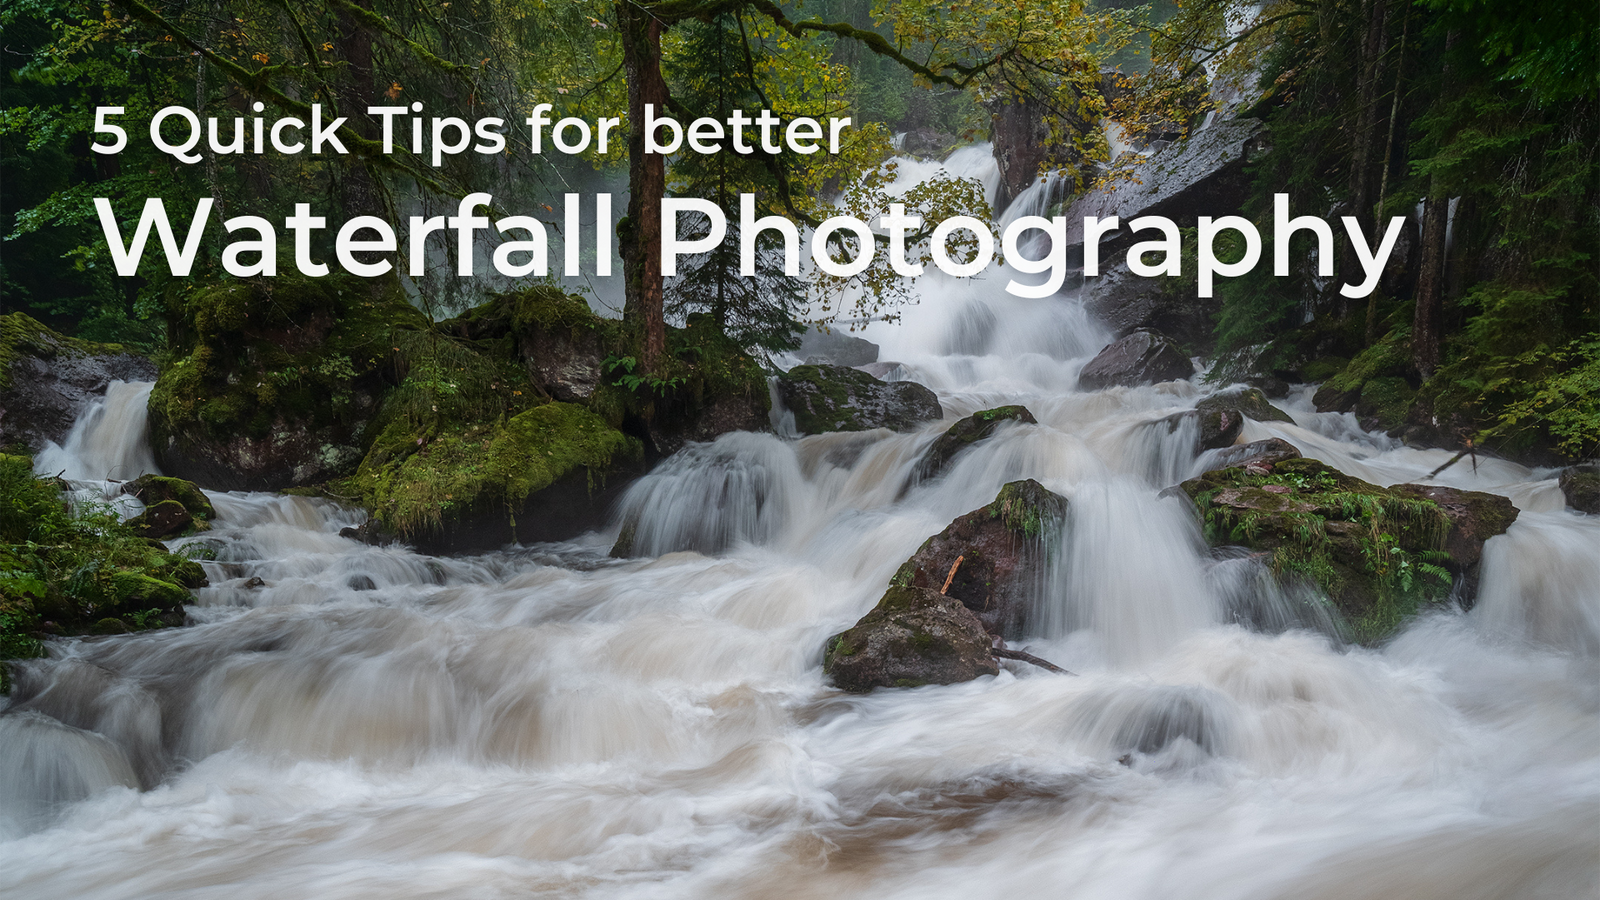 Waterfall Photography Tips and Tricks